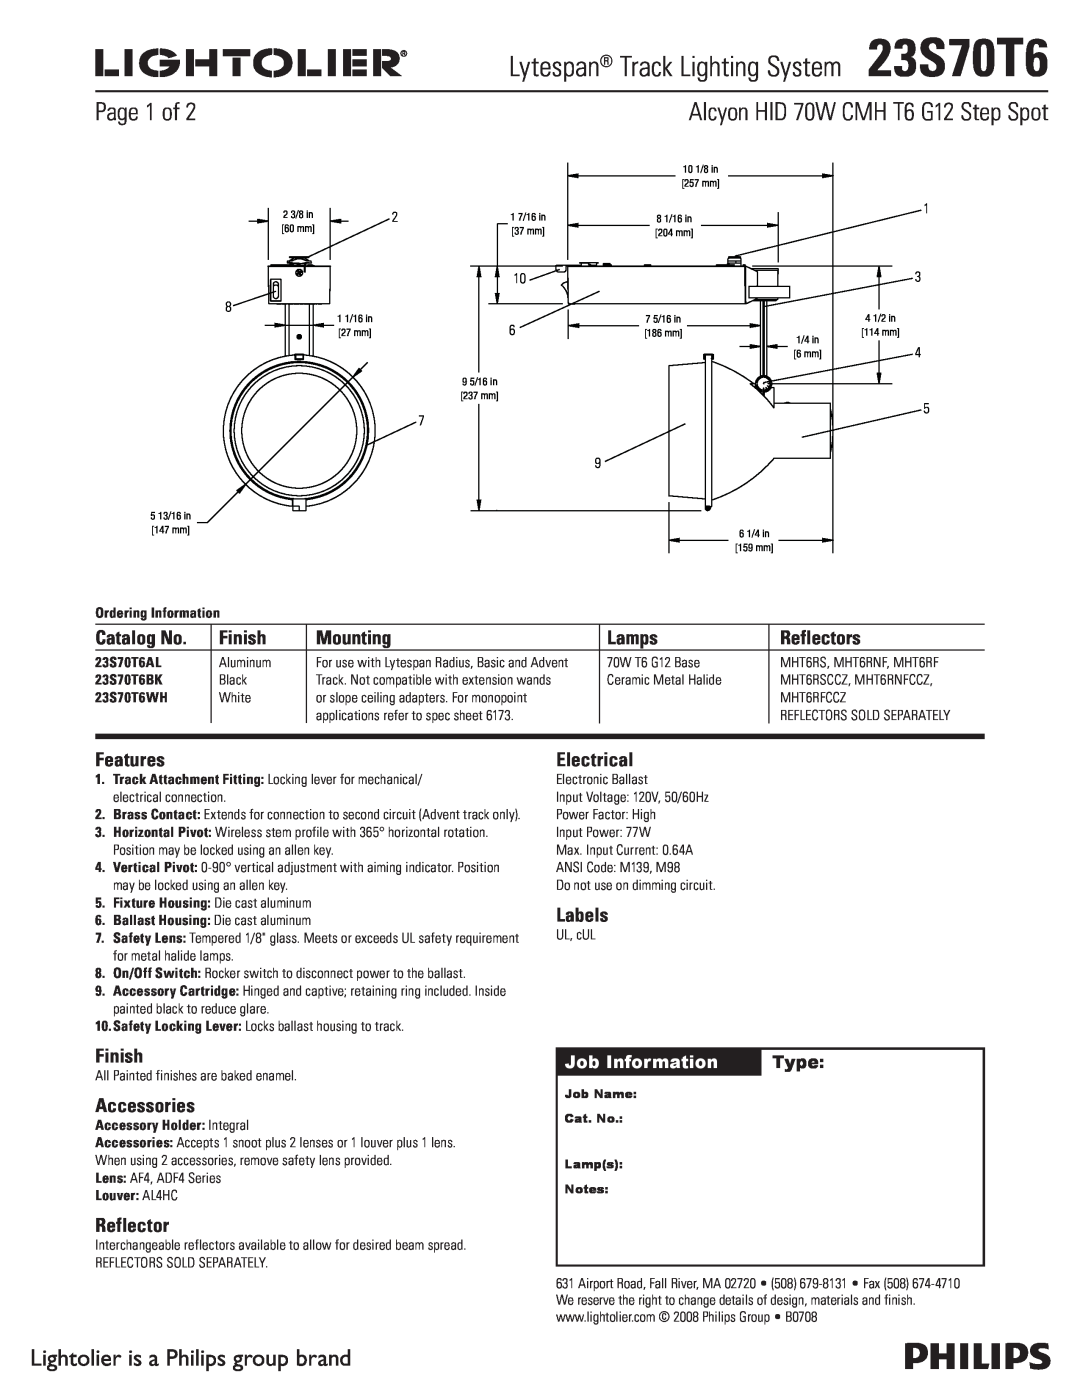 Lightolier manual Lytespan Track Lighting System23S70T6, Page 1 of, Lightolier is a Philips group brand, Catalog No 